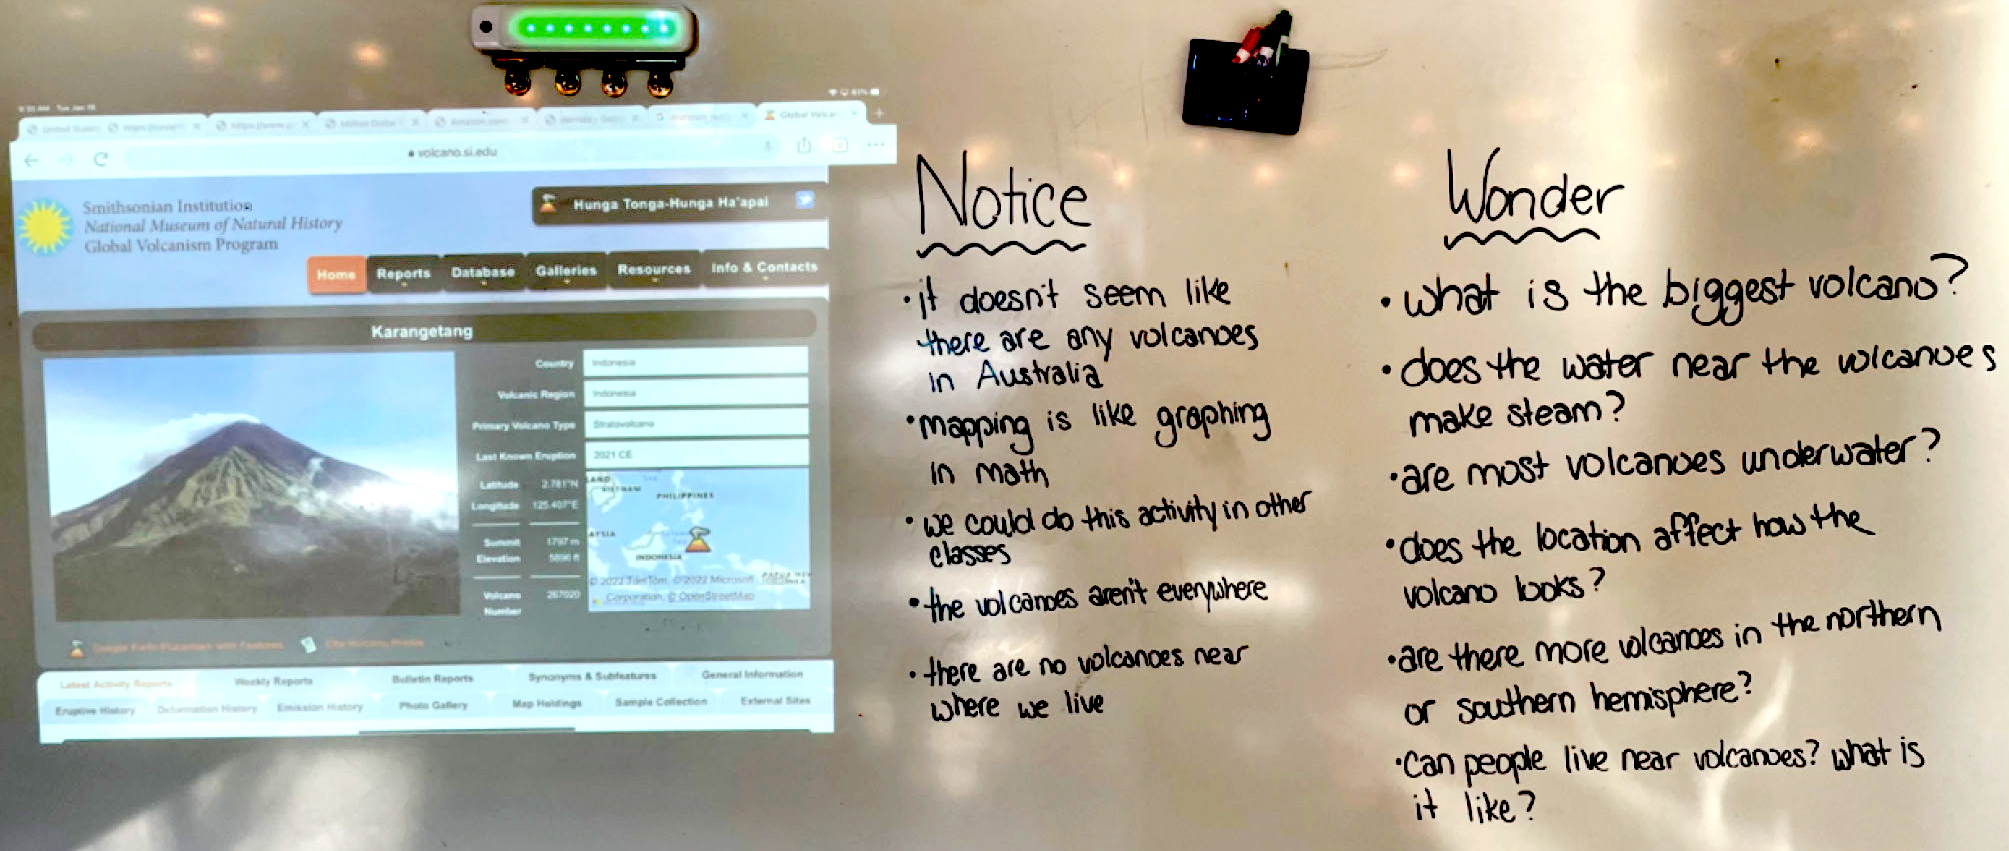 Projection of information and record of students’ questions and observations. 